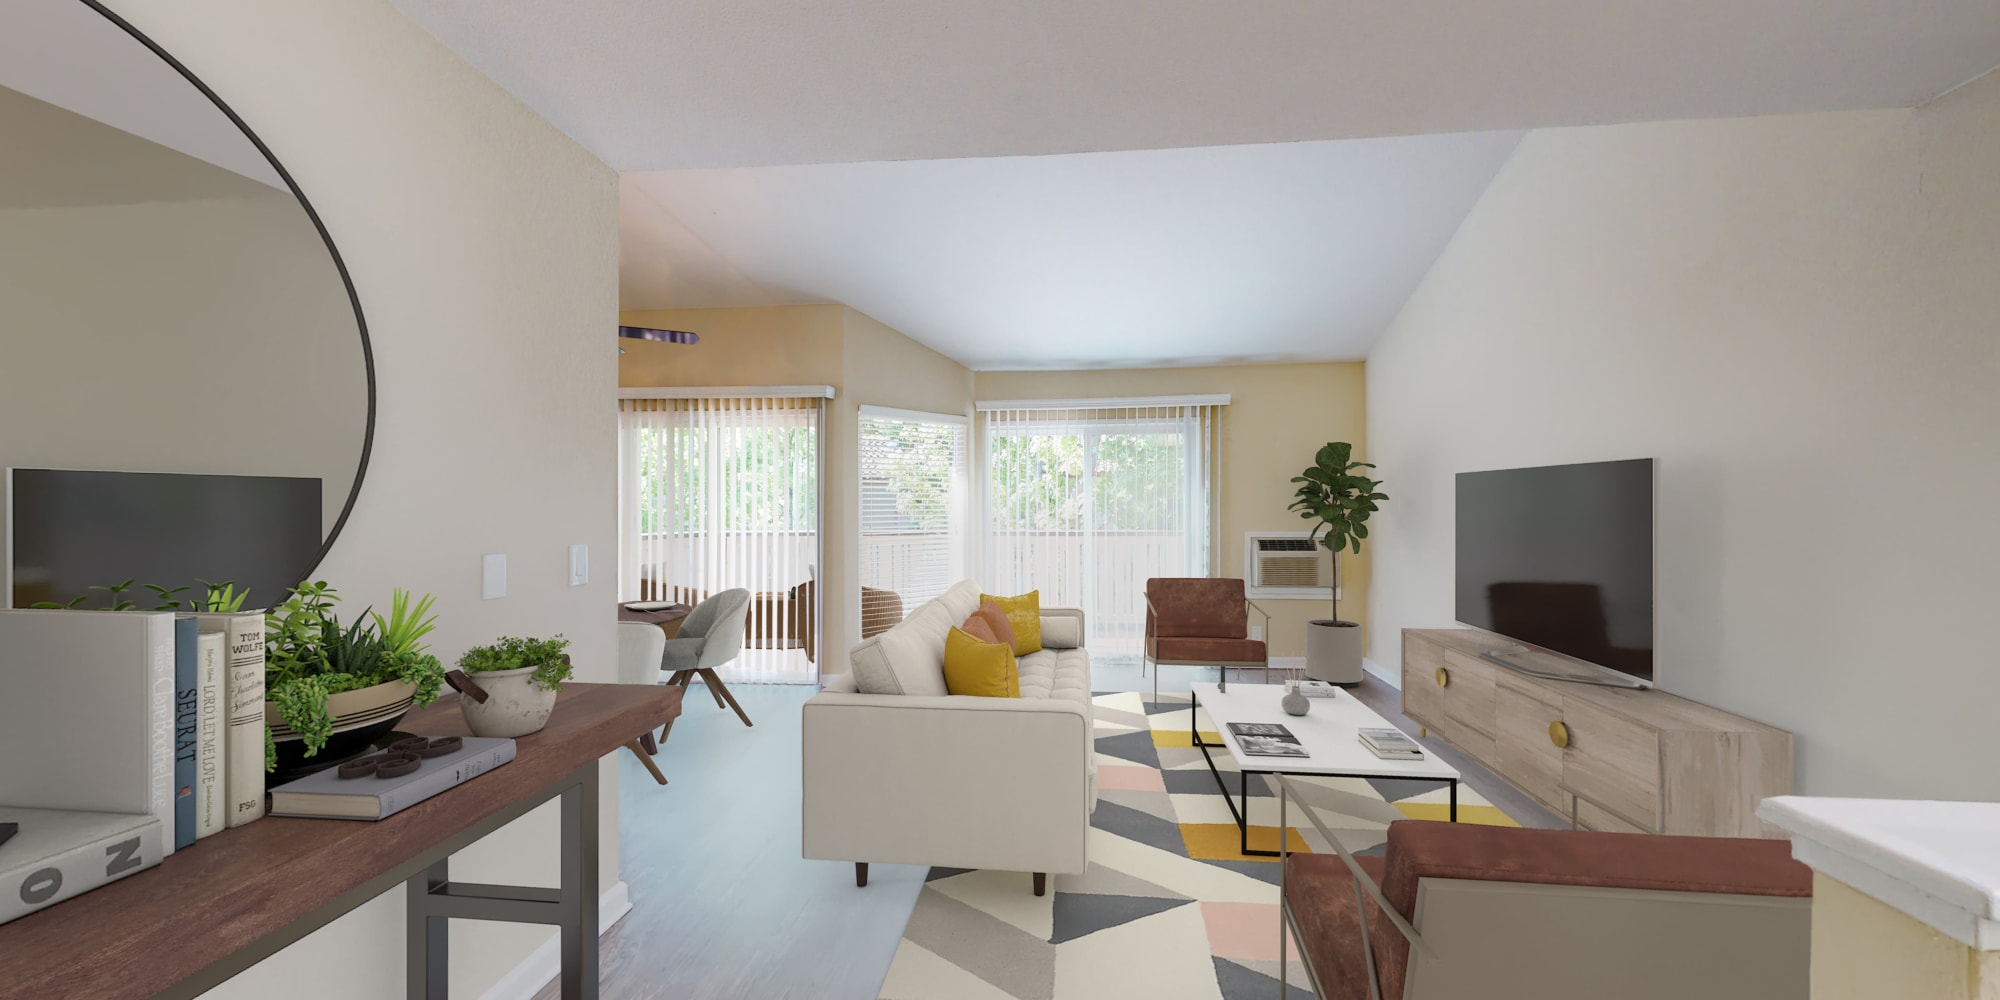 Two-bedroom apartment's living area with bay windows and plank flooring at Valley Plaza Villages in Pleasanton, California